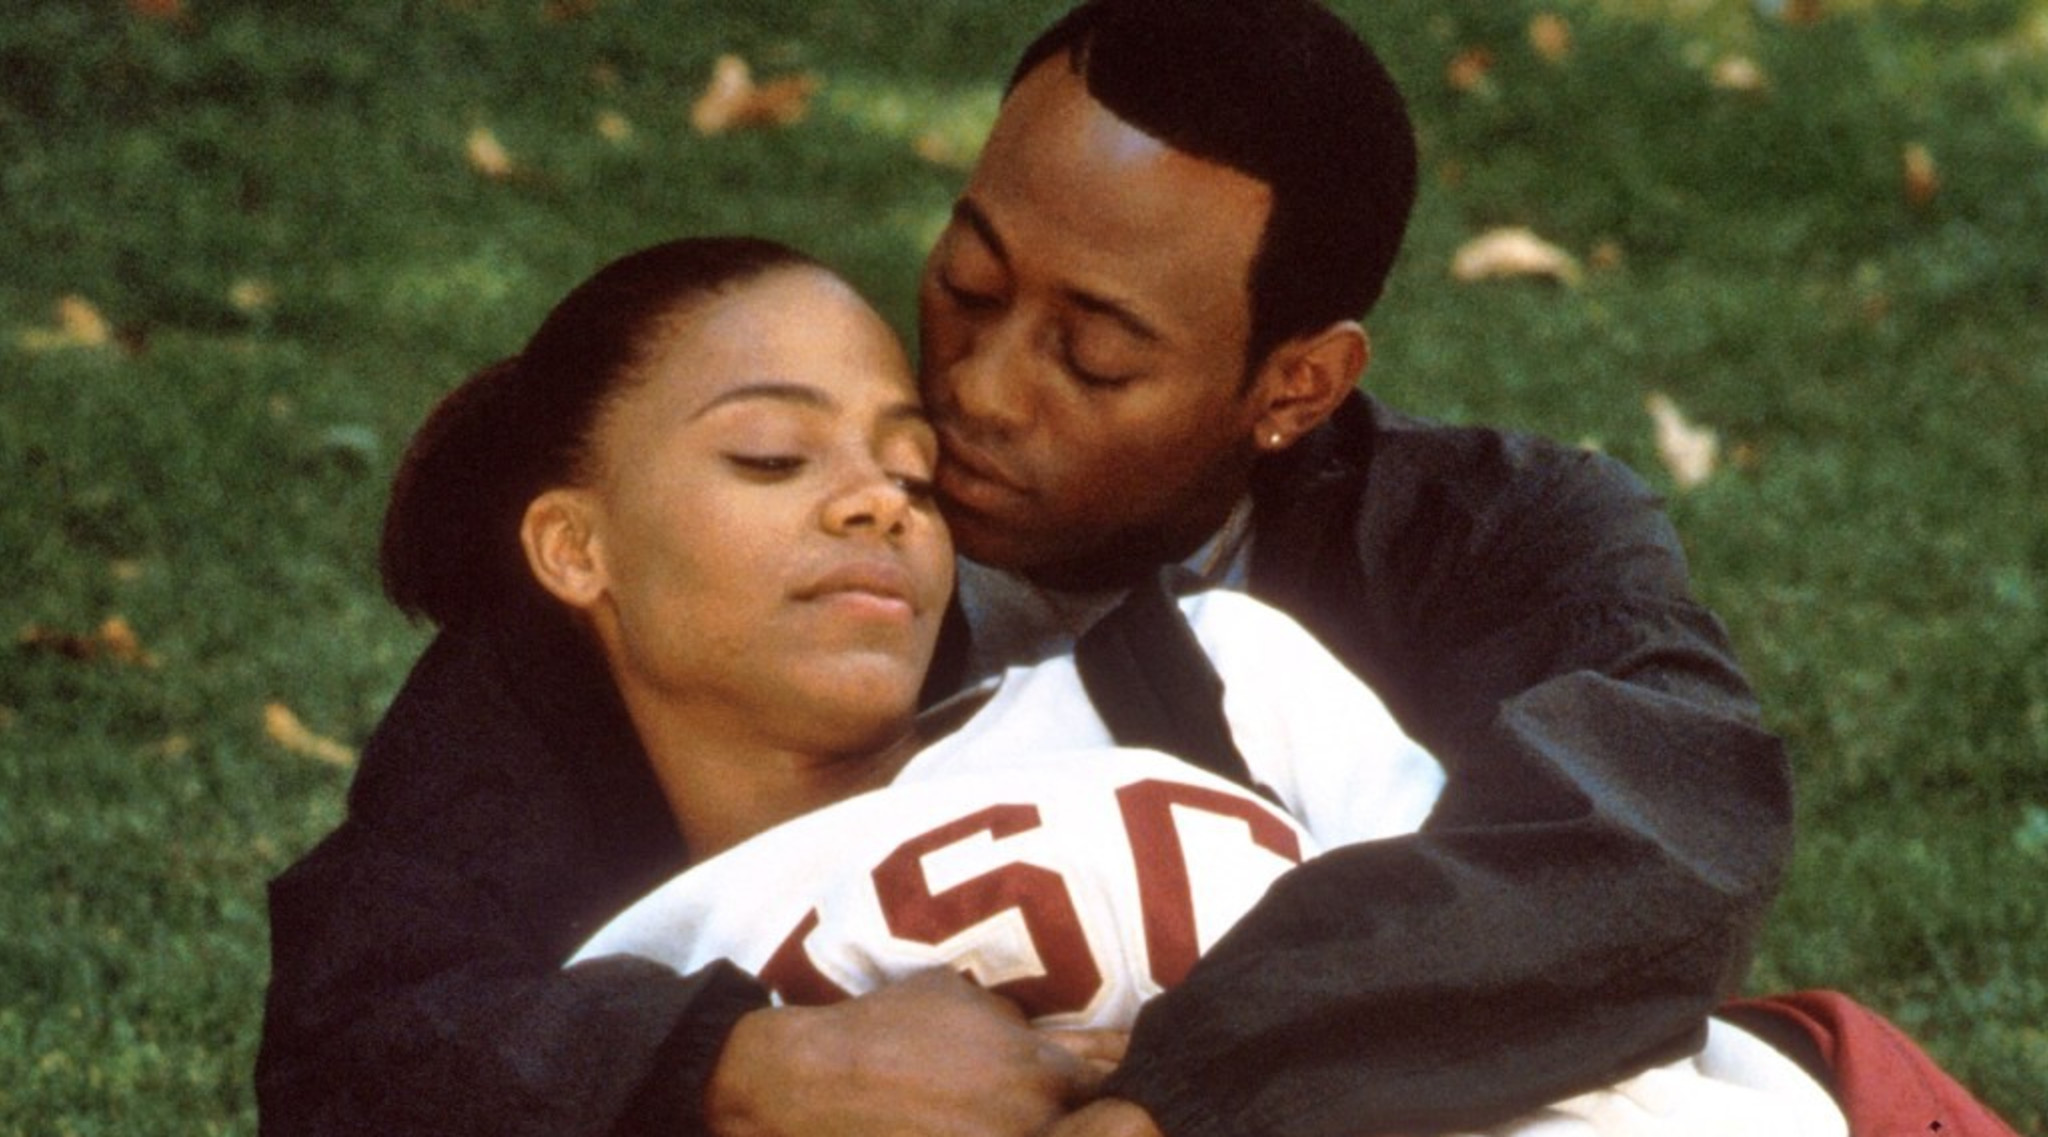 Valentine’s Day Movie Guide: Films for All Relationships